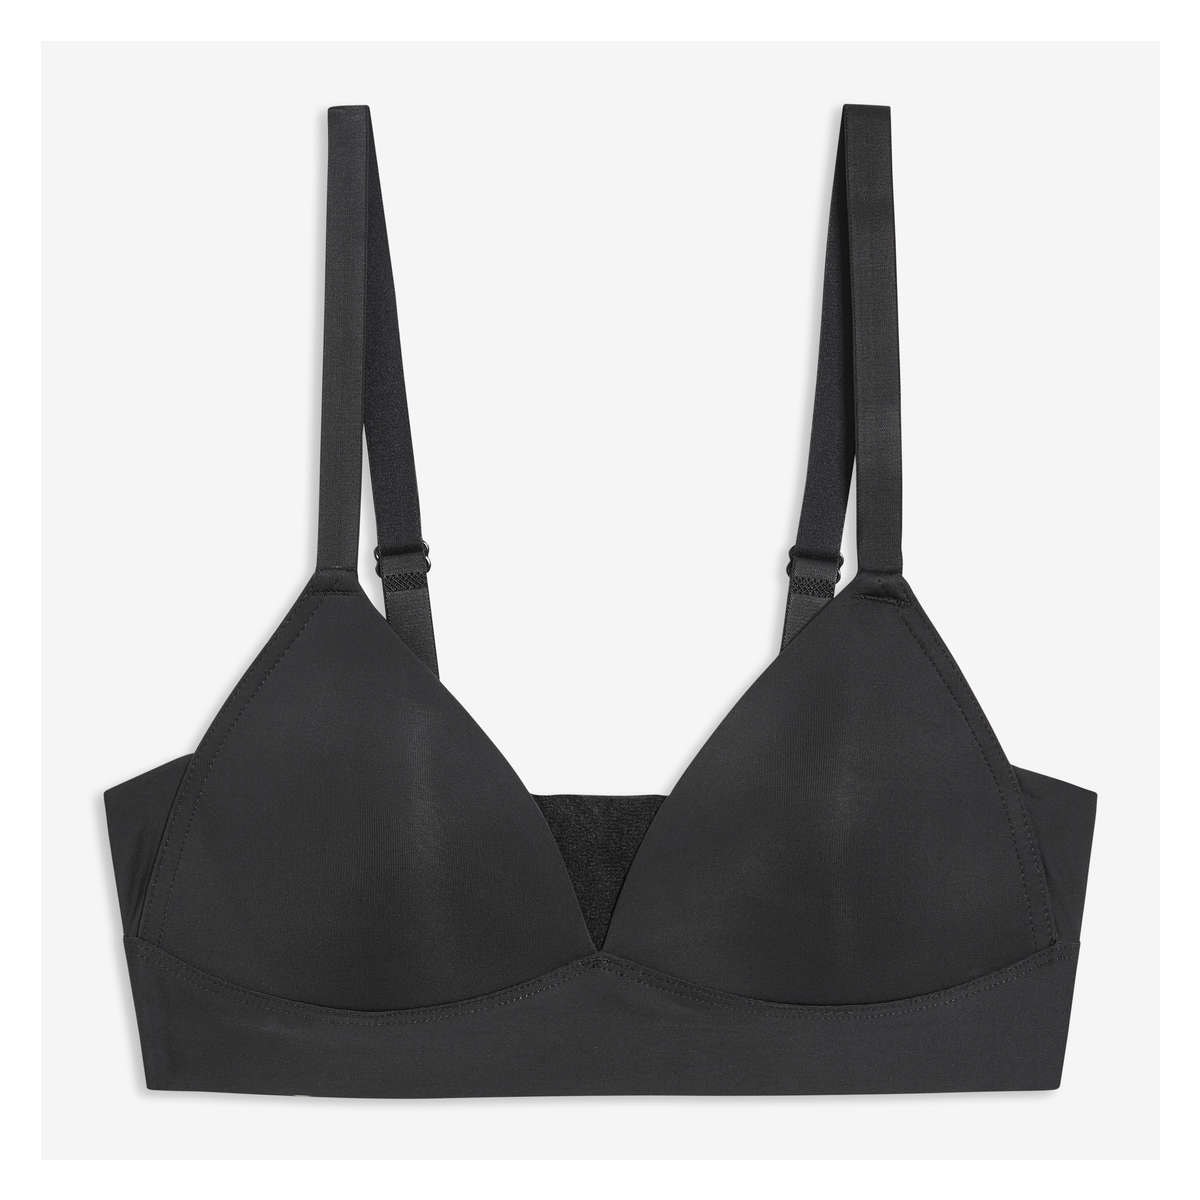 Calvin Klein Push Up Bra 36A for Sale in San Marcos, CA - OfferUp